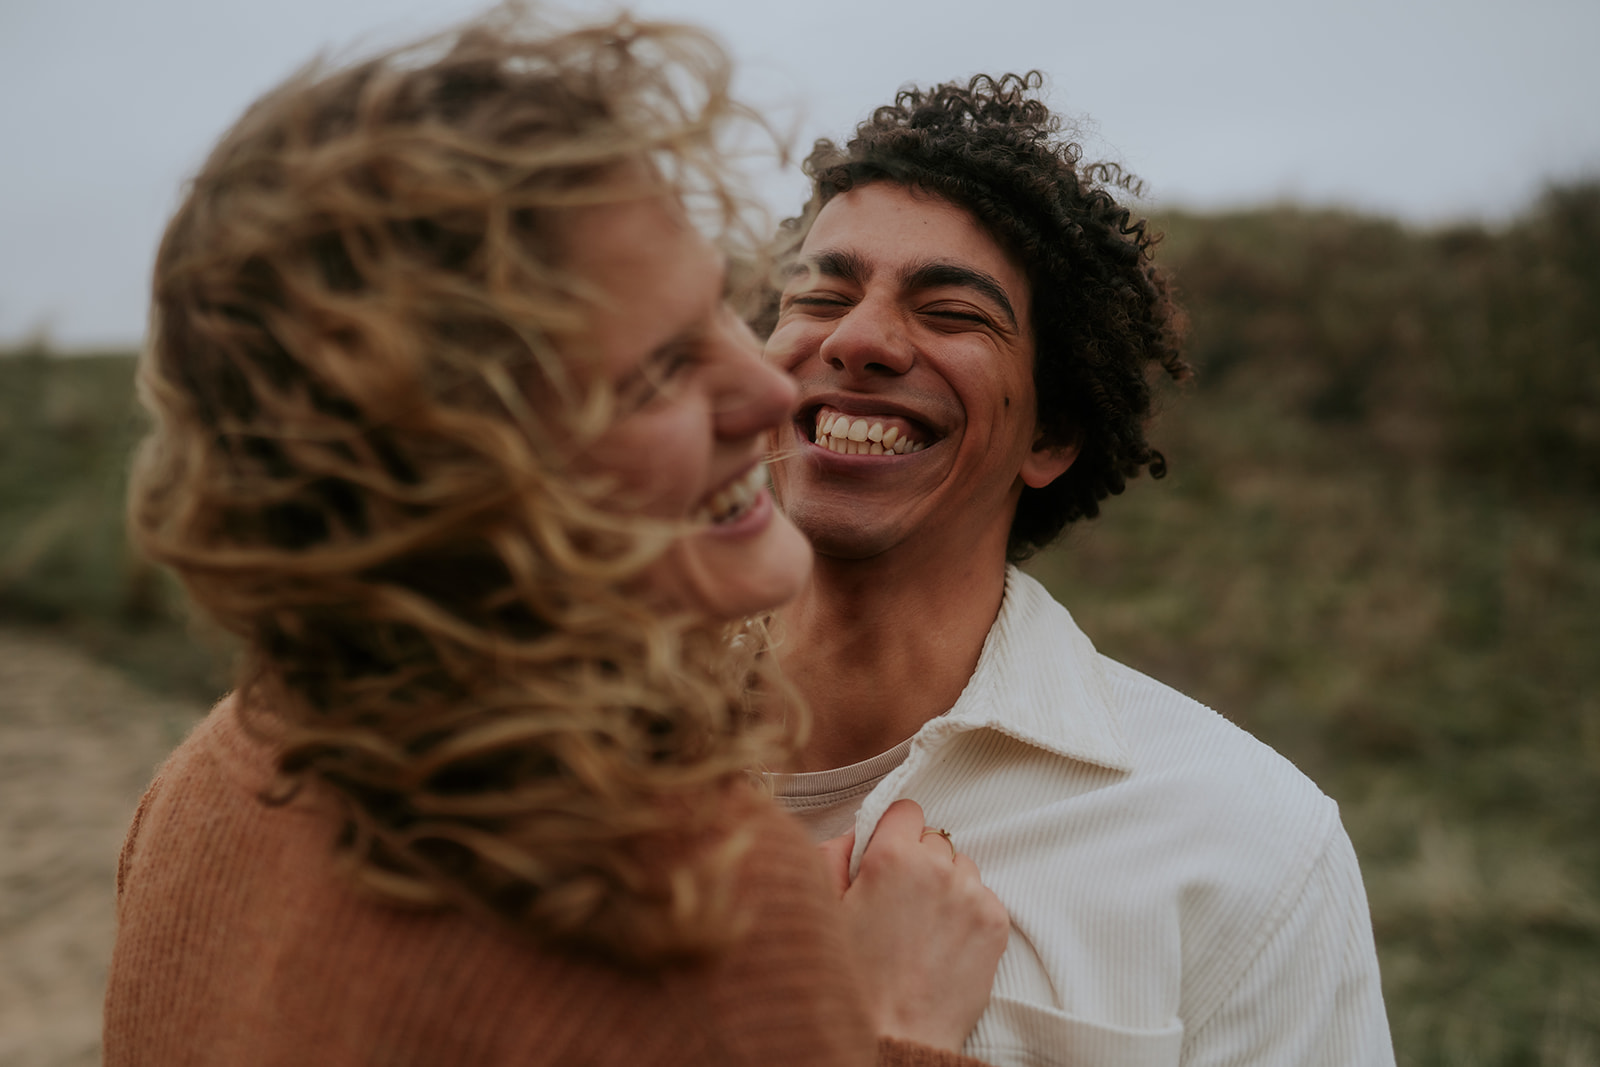 Steven laughing brightly with his brown curly hair in the dunes of netherlands